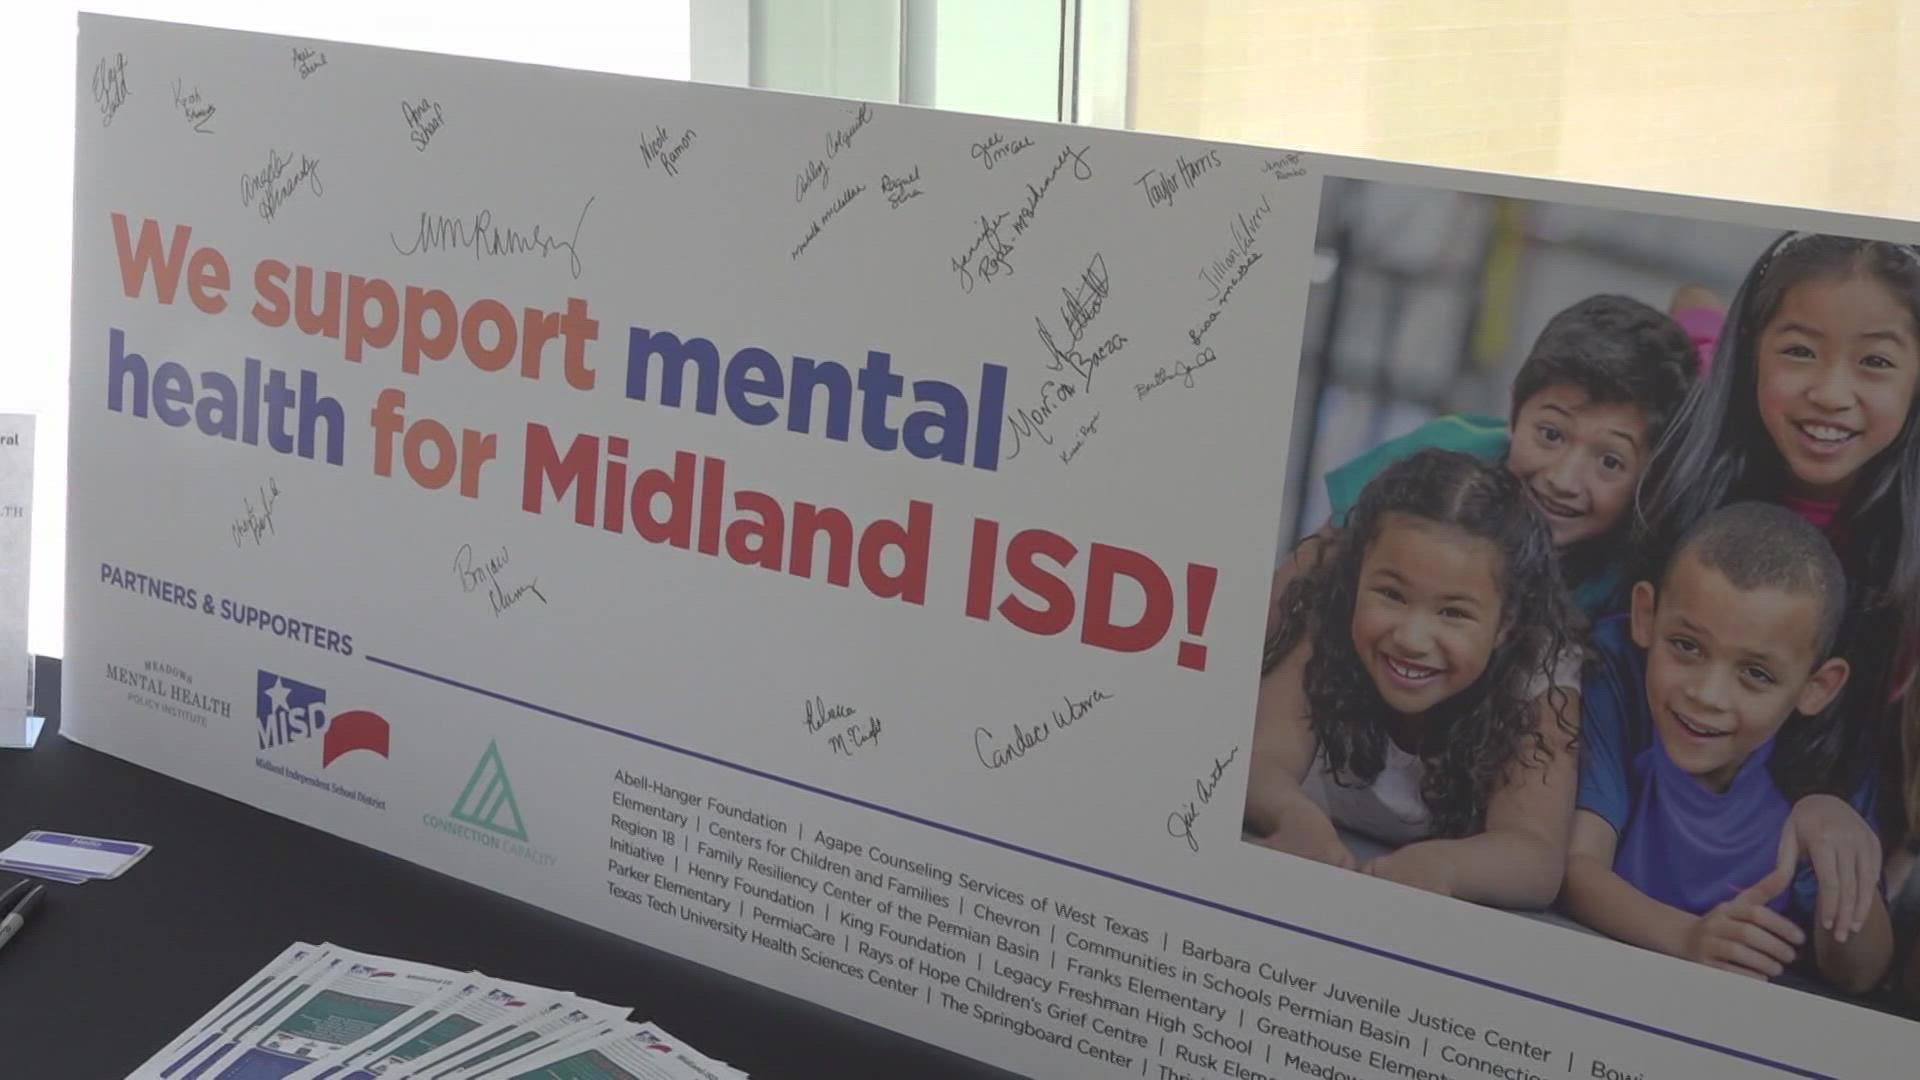 MISD would like to combine state and local funding to ensure they are fully addressing mental health needs in the district.